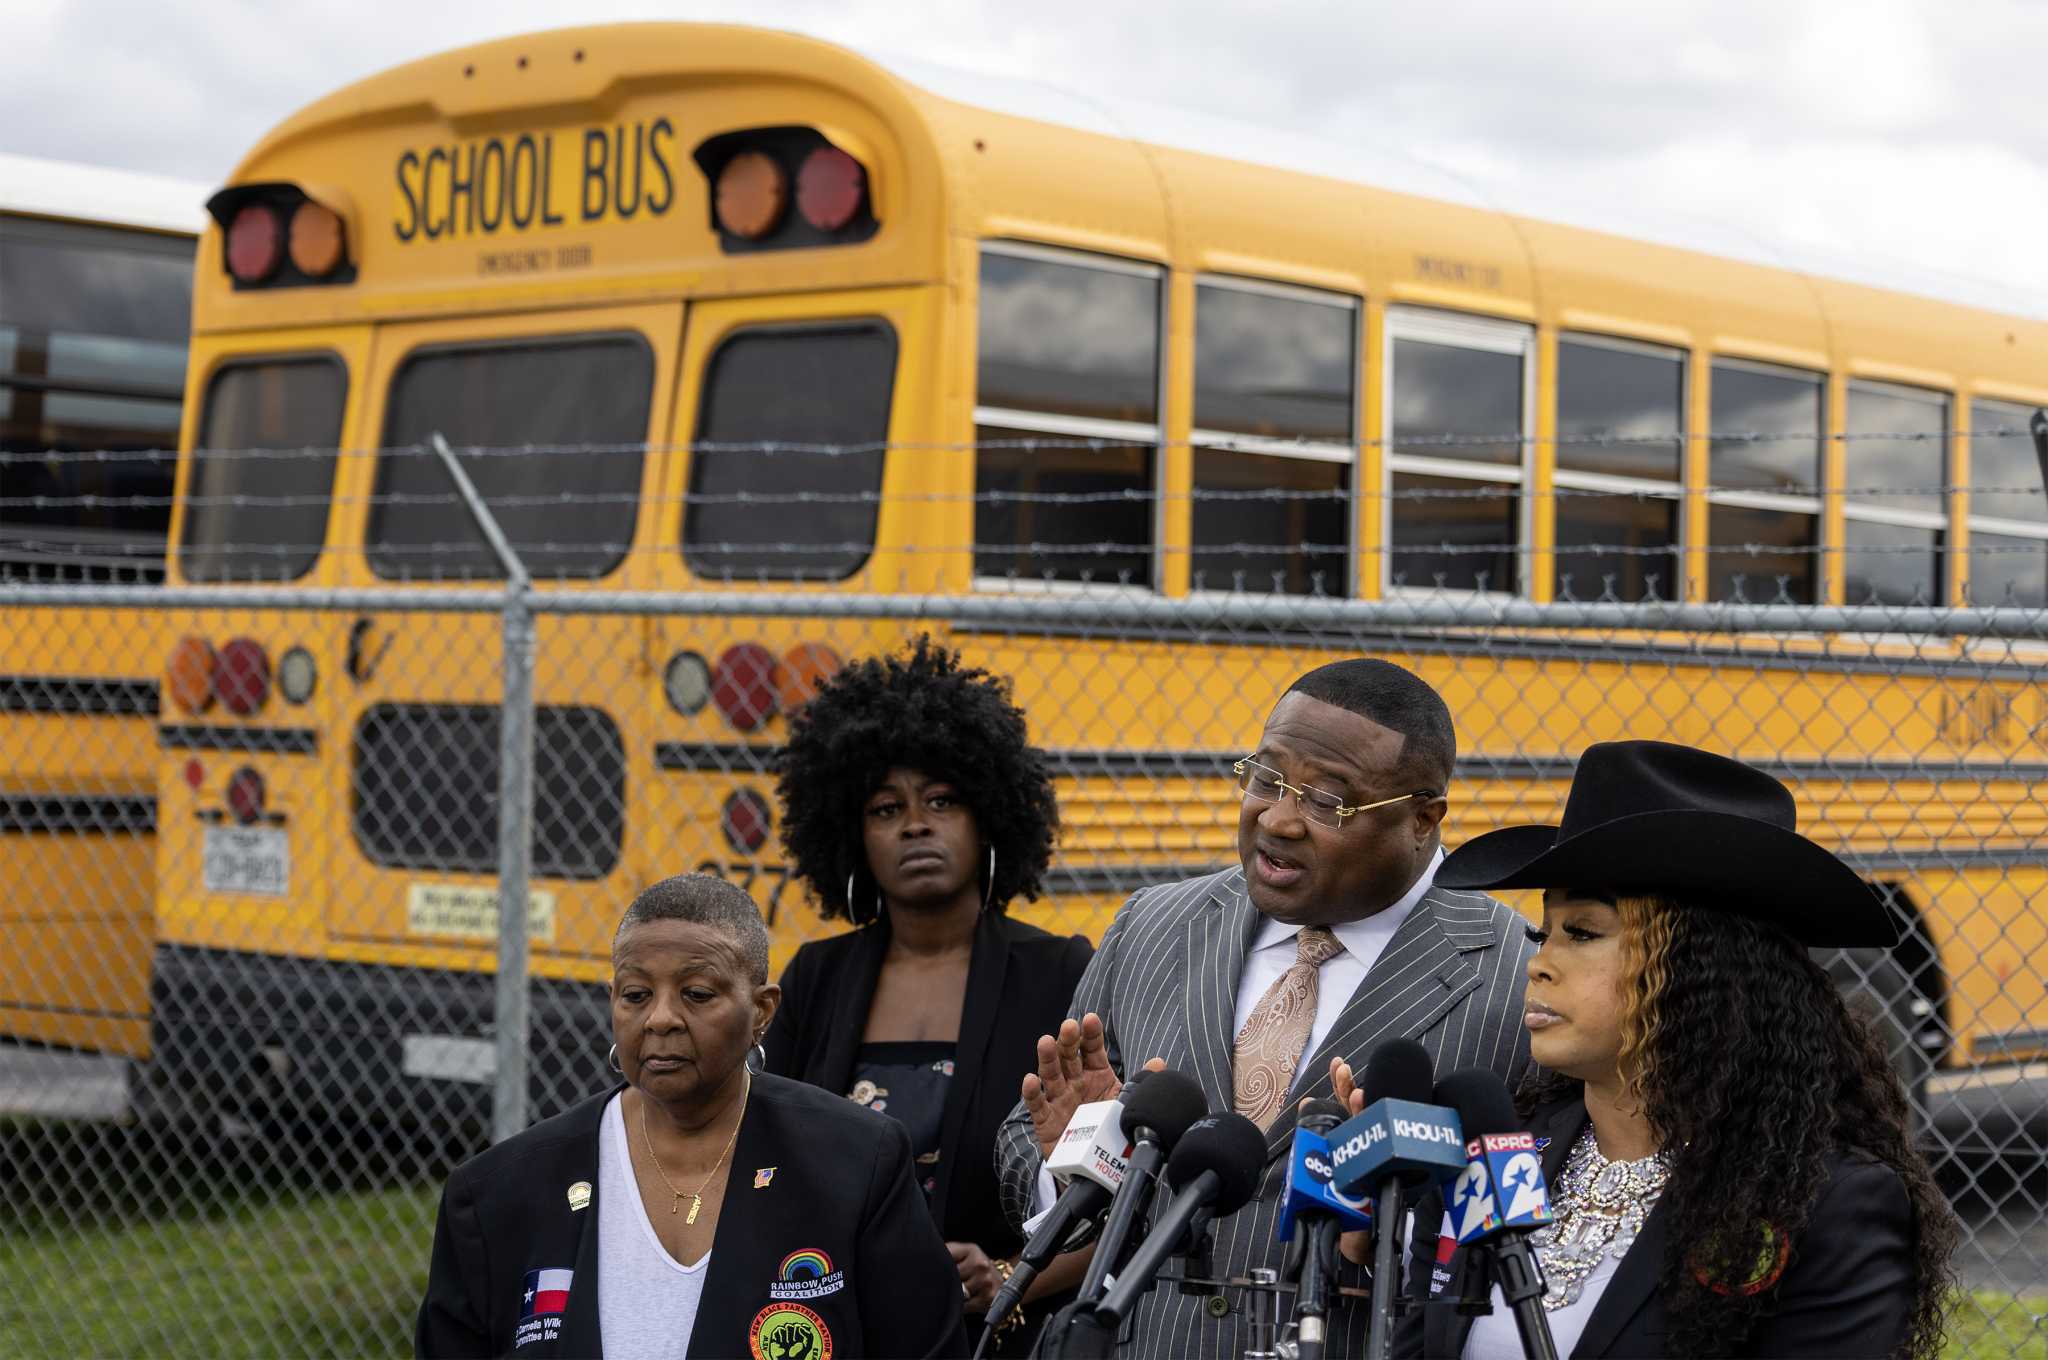  Child, 11, charged in sexual assault of younger student on Aldine ISD bus 